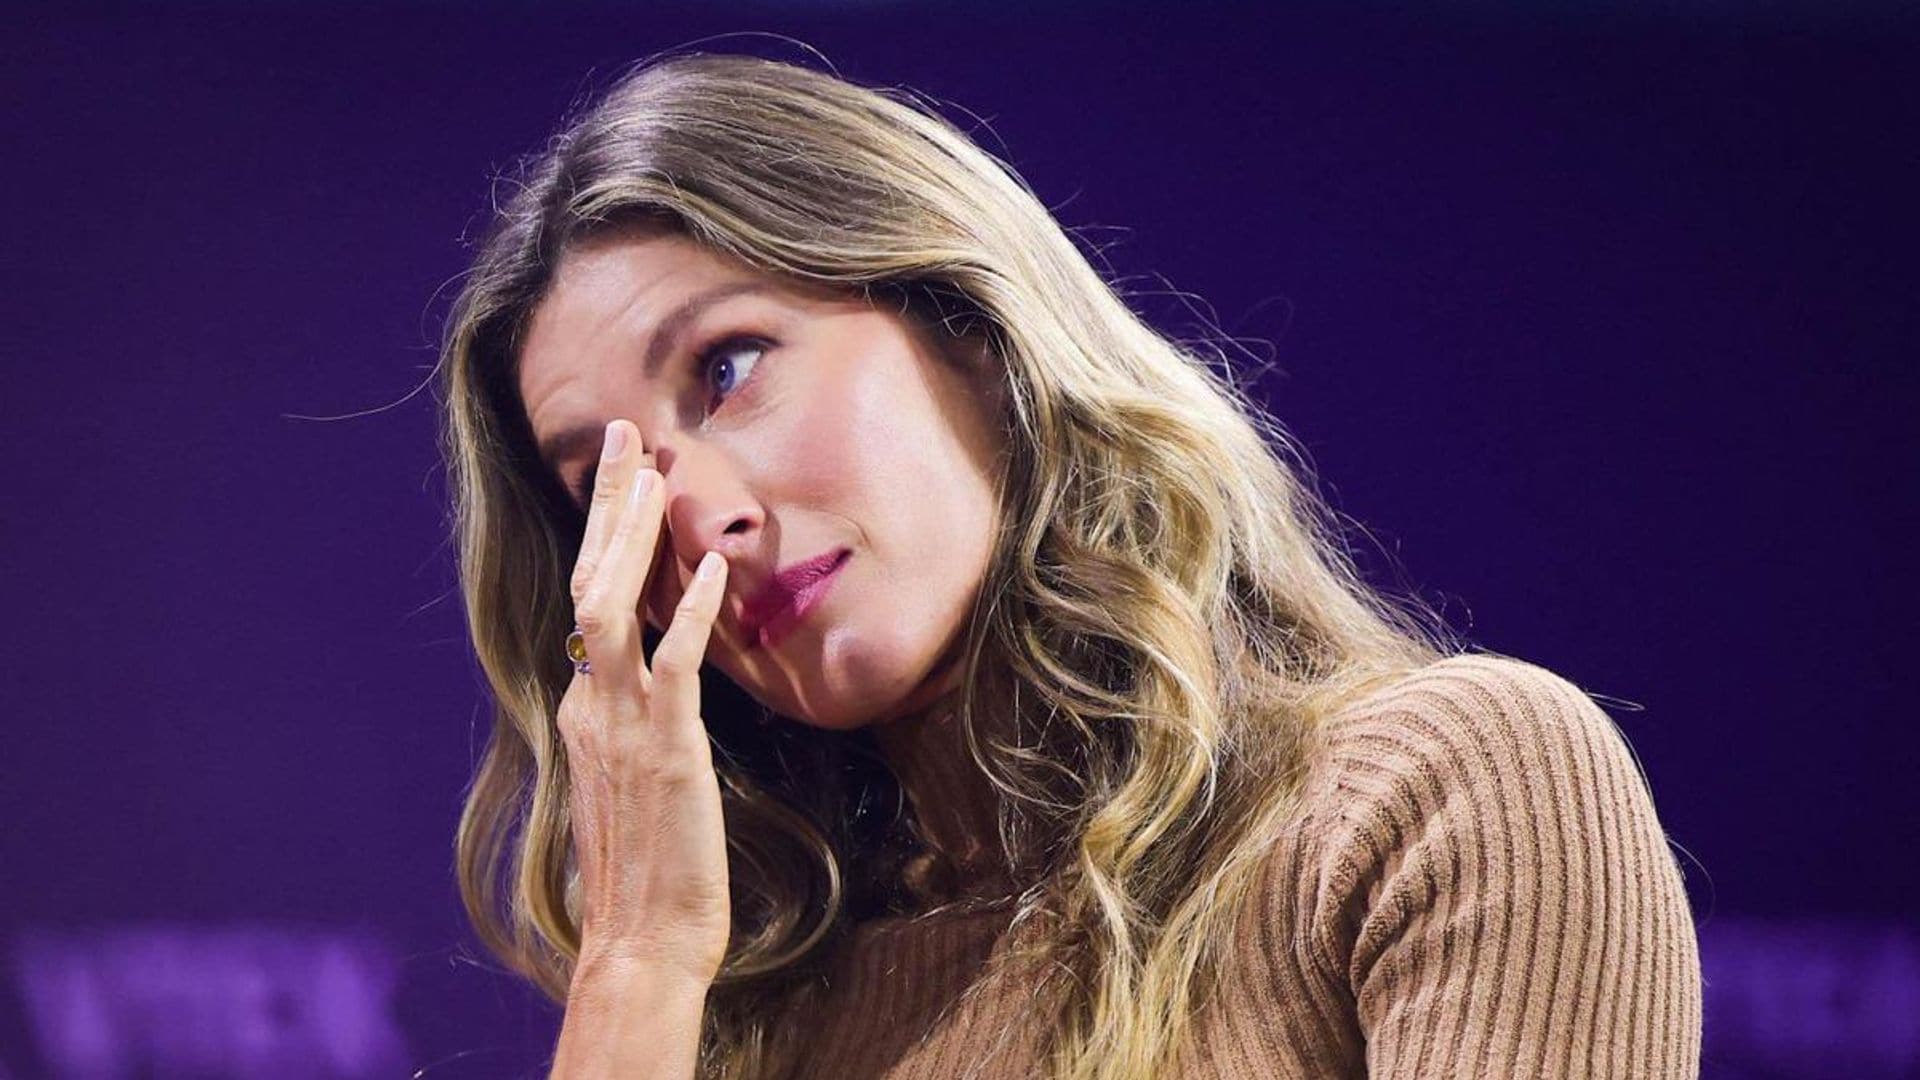 Gisele Bündchen fought back the tears while discussing her life and dreams during a lecture